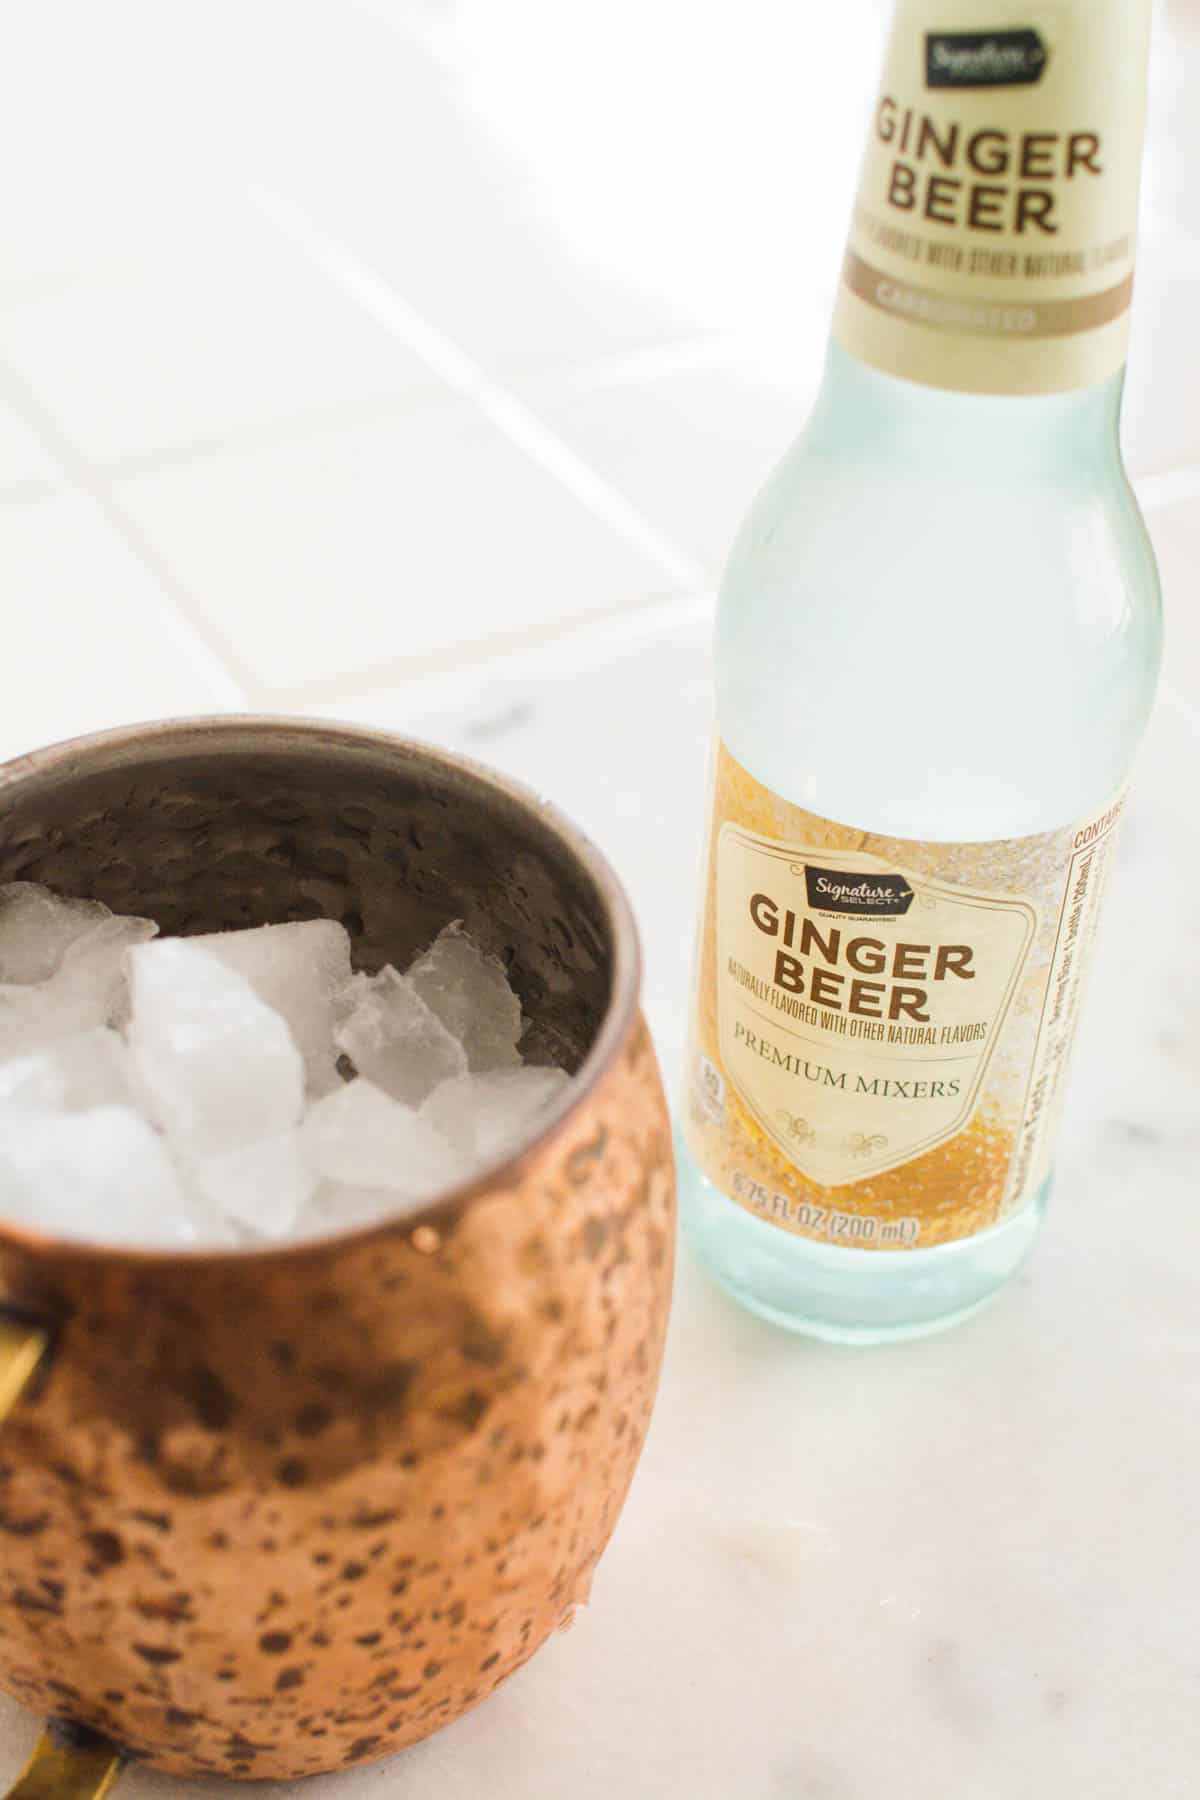 A copper mug full of ice next to a bottle of ginger beer.